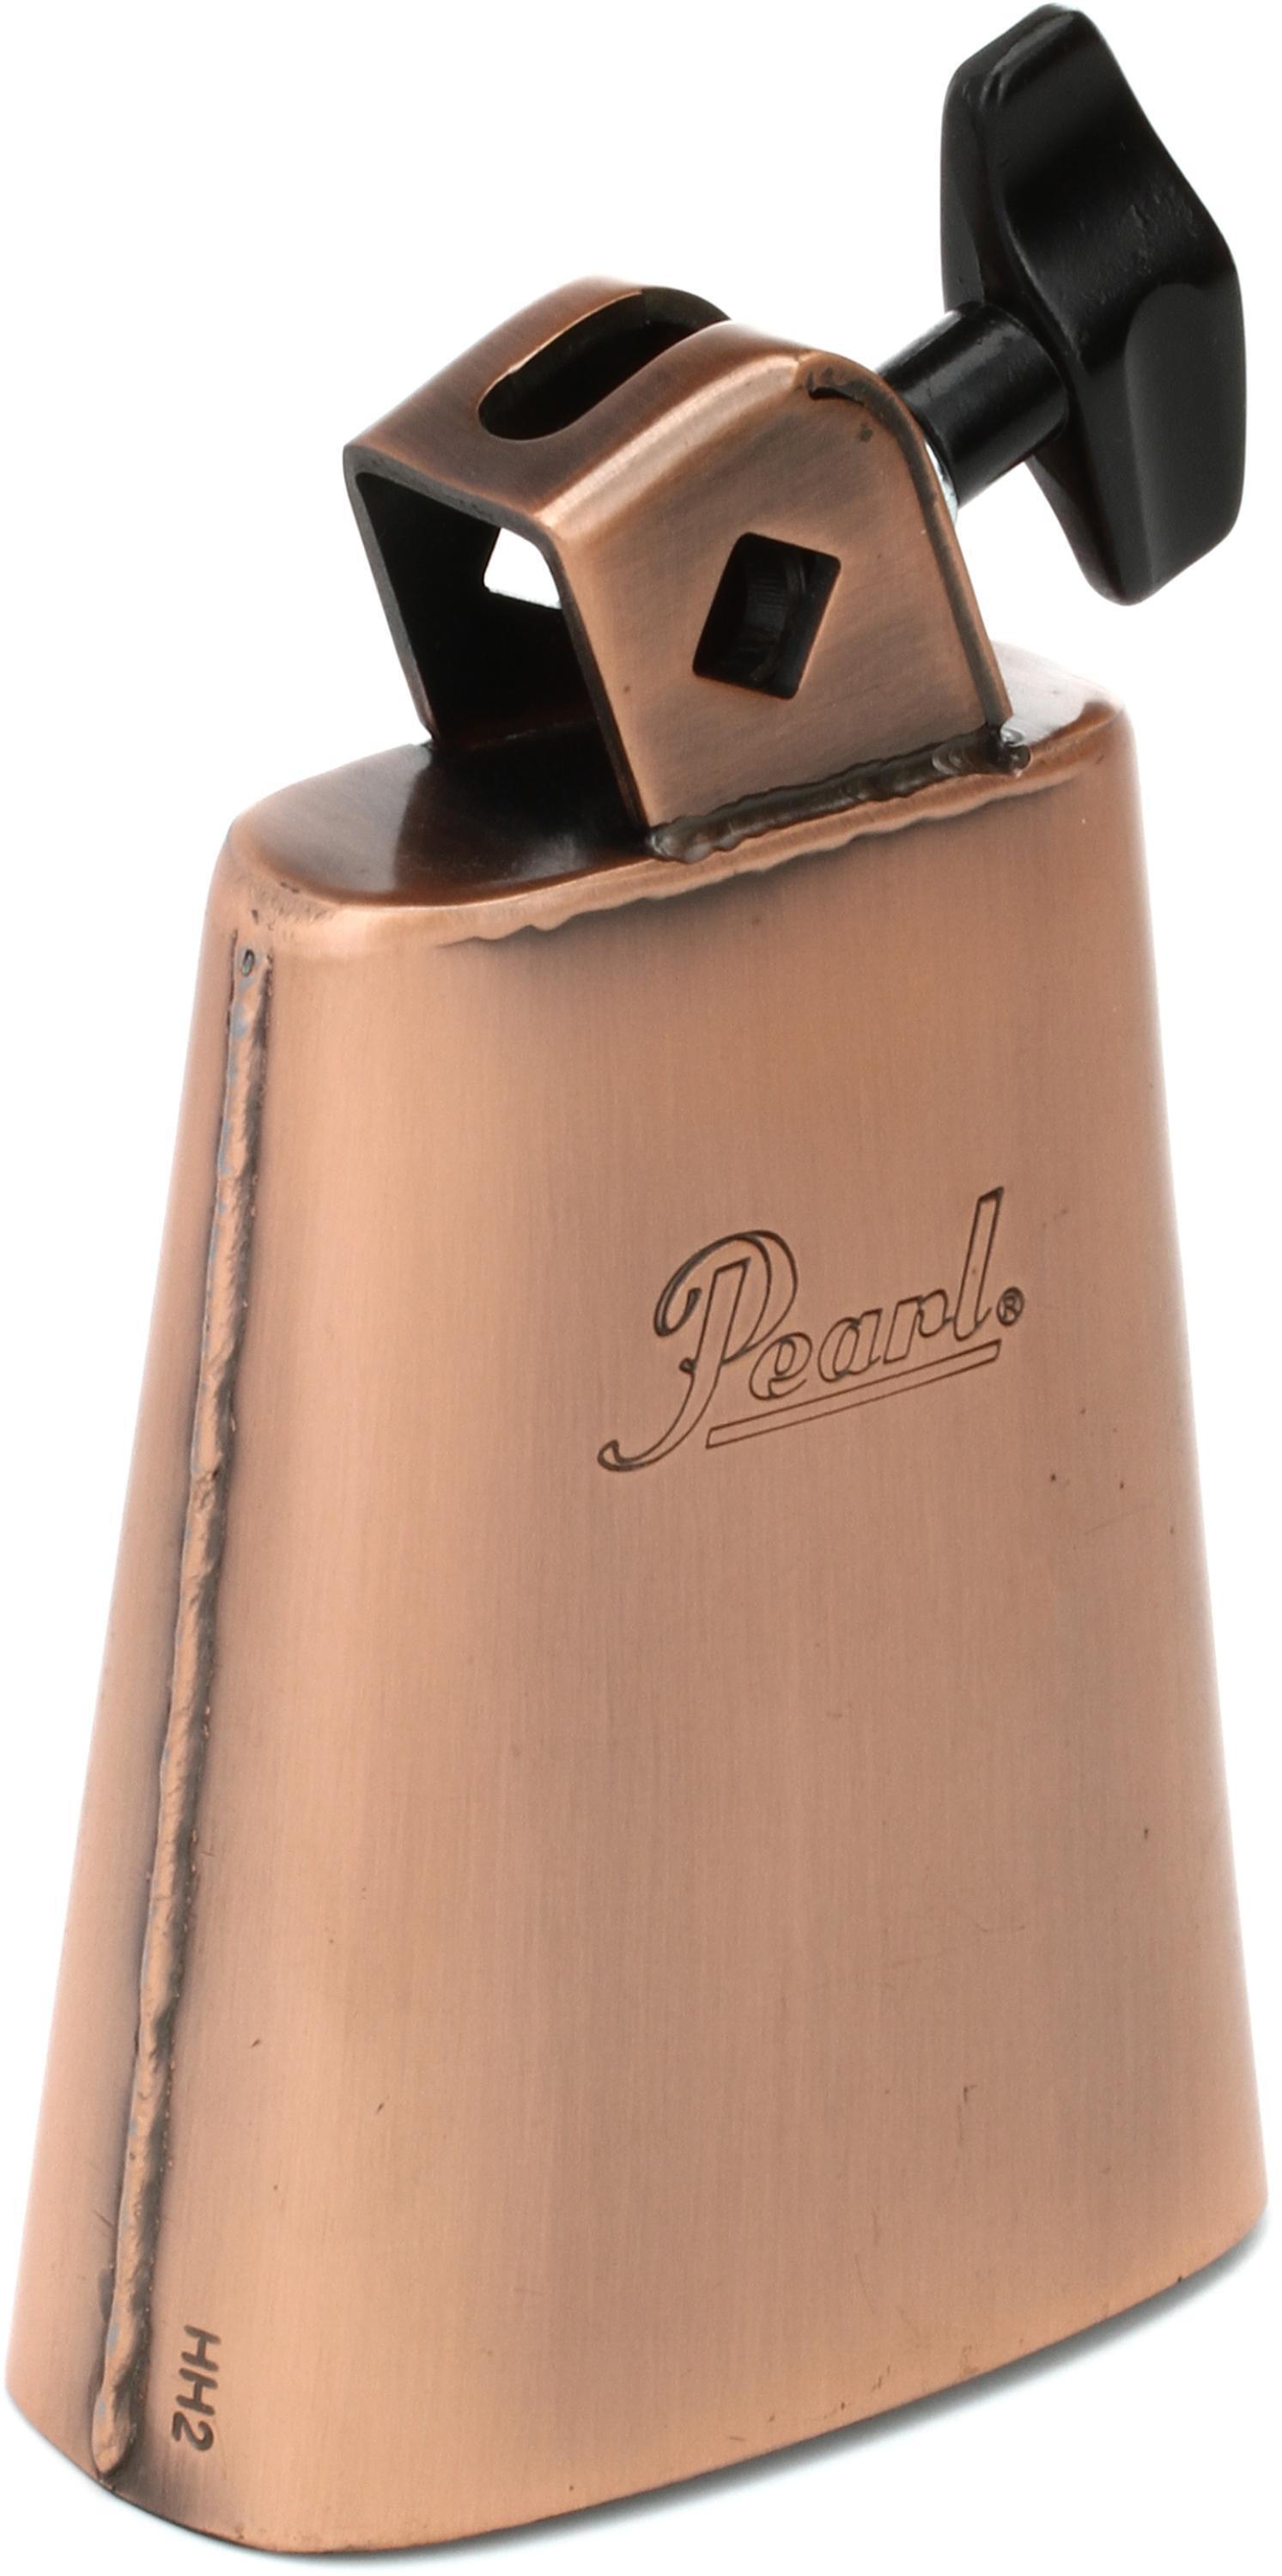 II　Hernandez　Signature　ClaBELL　Clave　Cowbell　Sweetwater　Horacio　HH2　Pearl　Foot